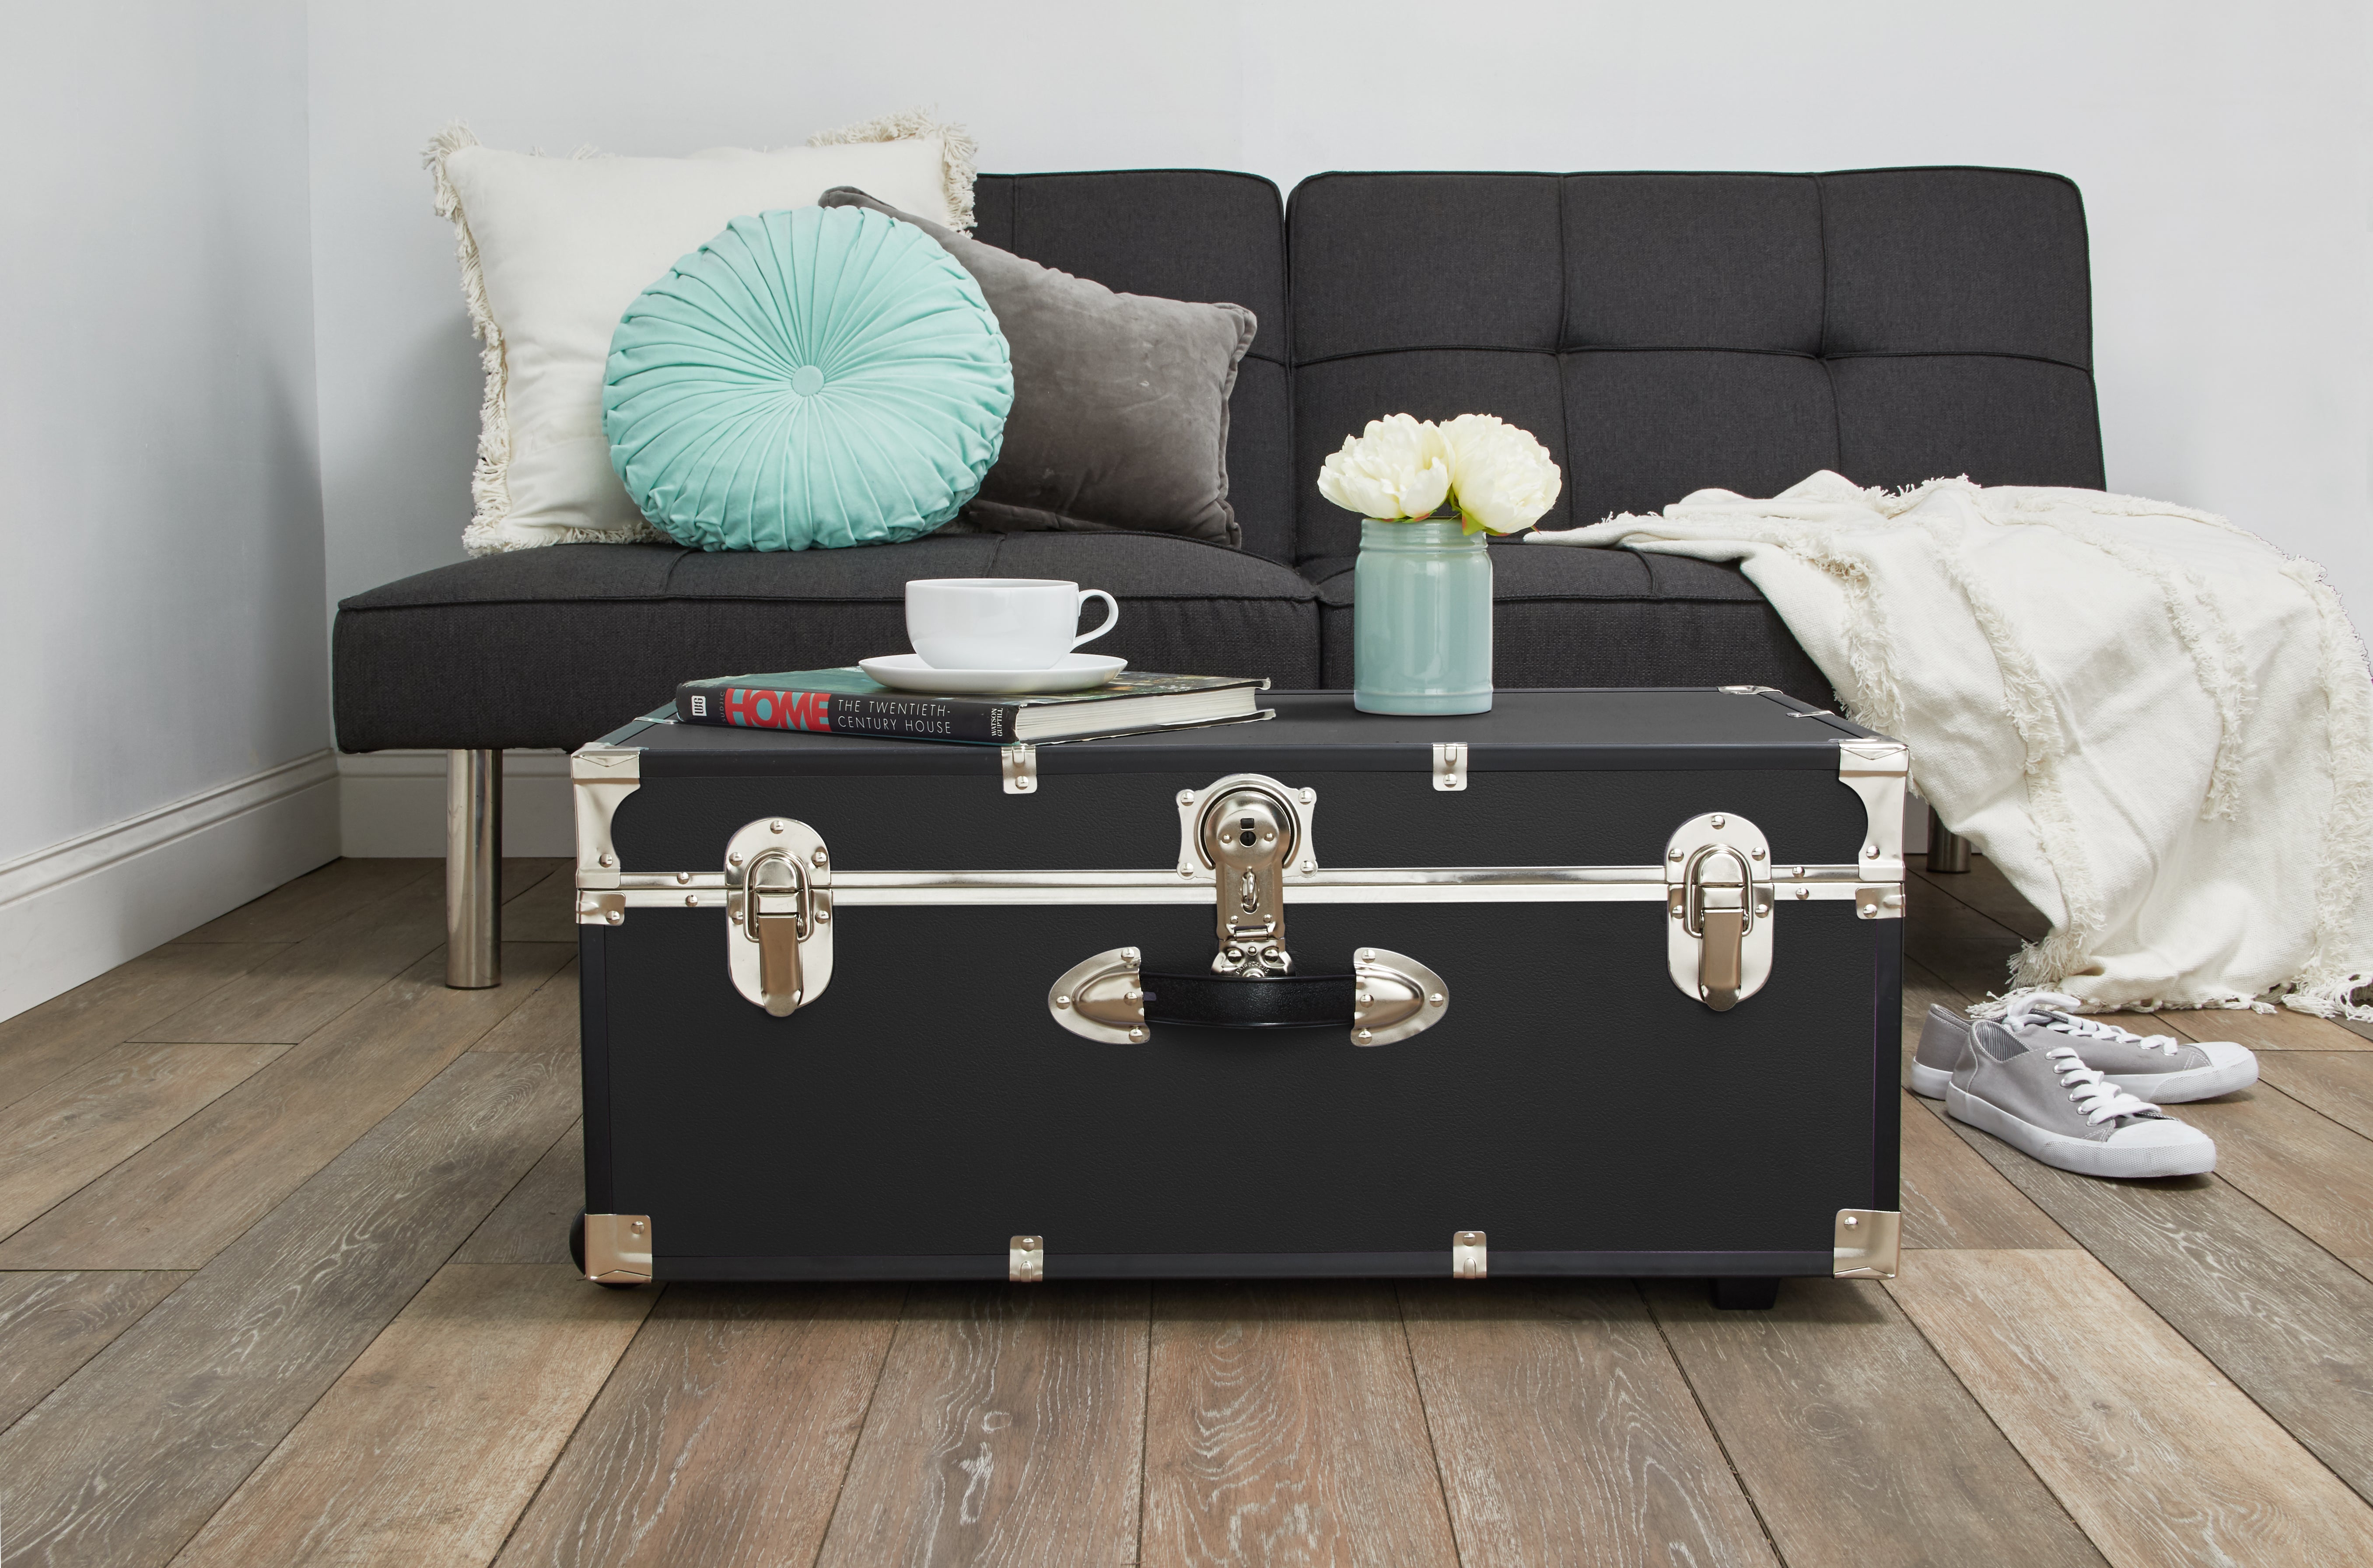 Trunk being used as coffee table, with teacup and flowers on top, in the living room - Seward Rover 30" Trunk with Wheels & Lock, Black